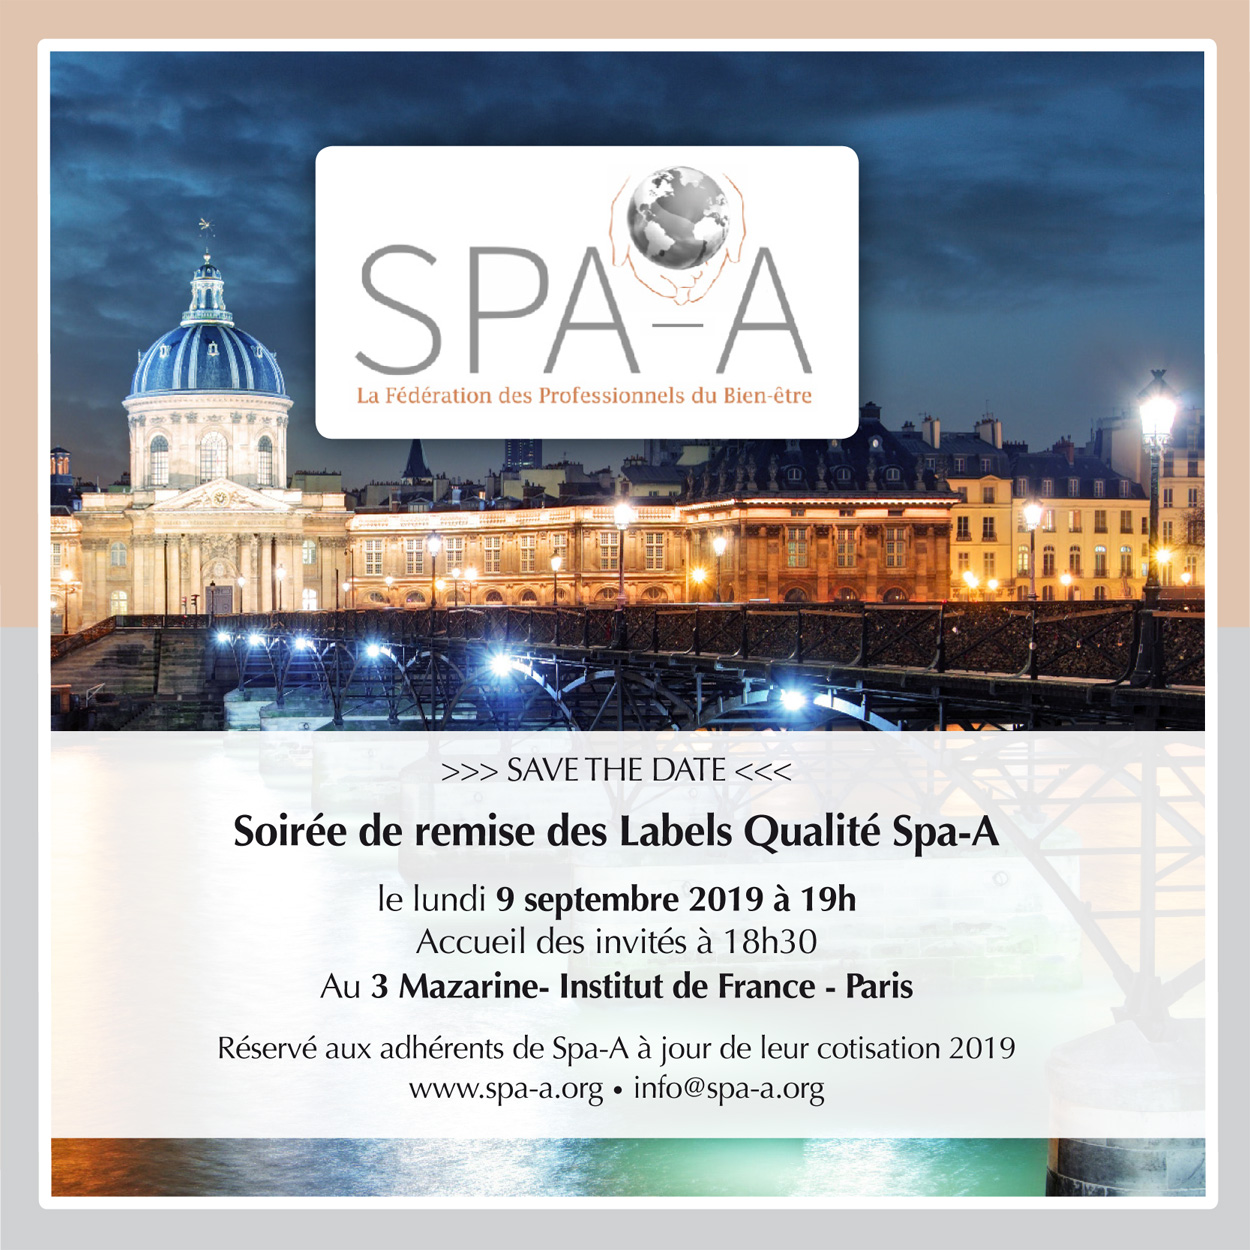 https://spa-a.org/wp-content/uploads/2022/03/SPA-A_save_the_date_2019.jpg